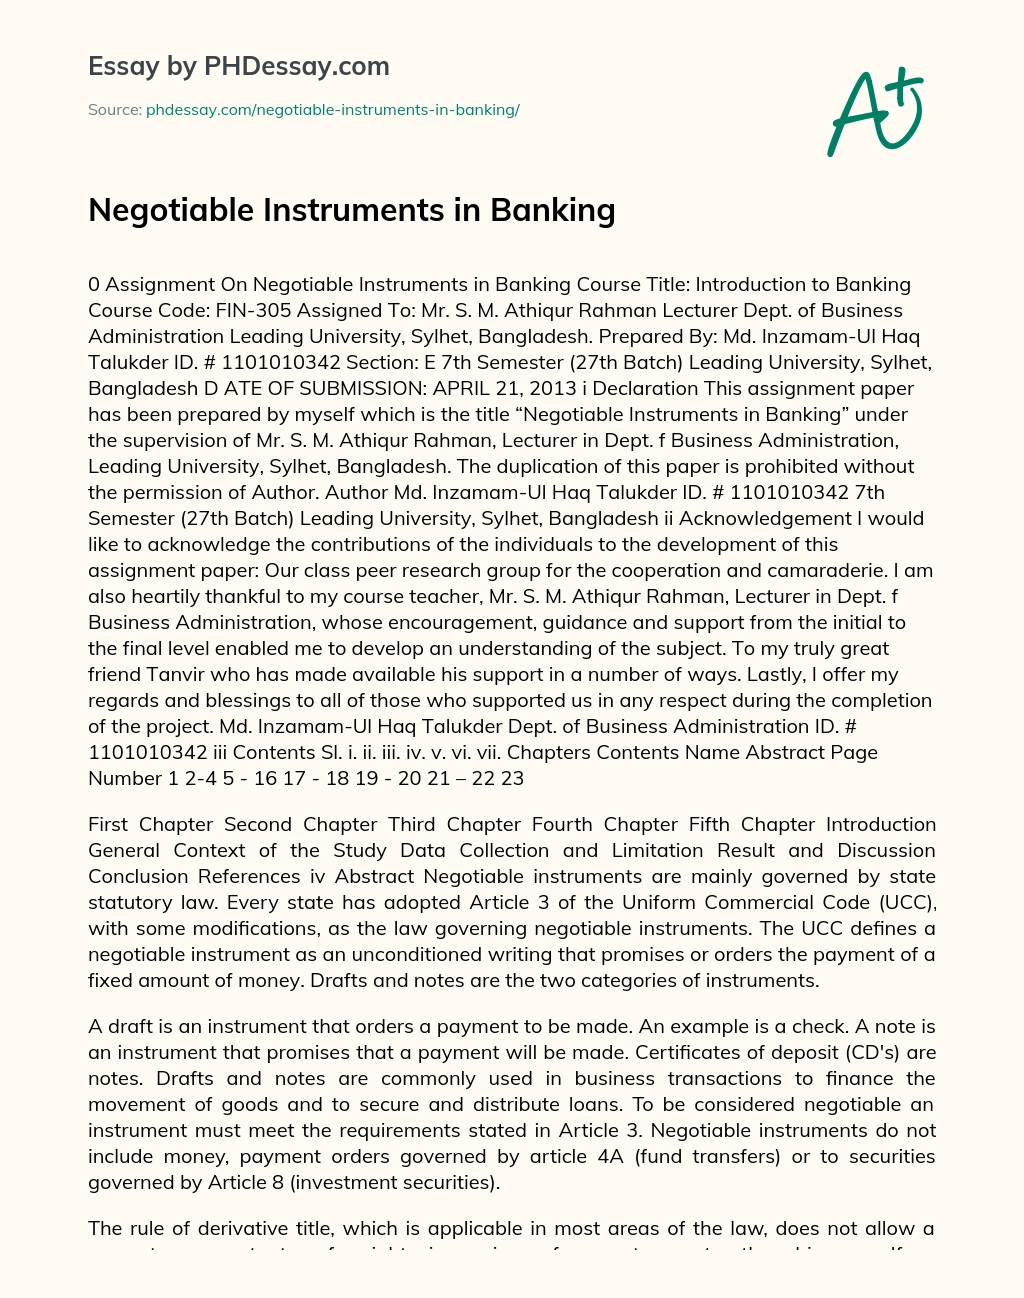 Negotiable Instruments in Banking essay